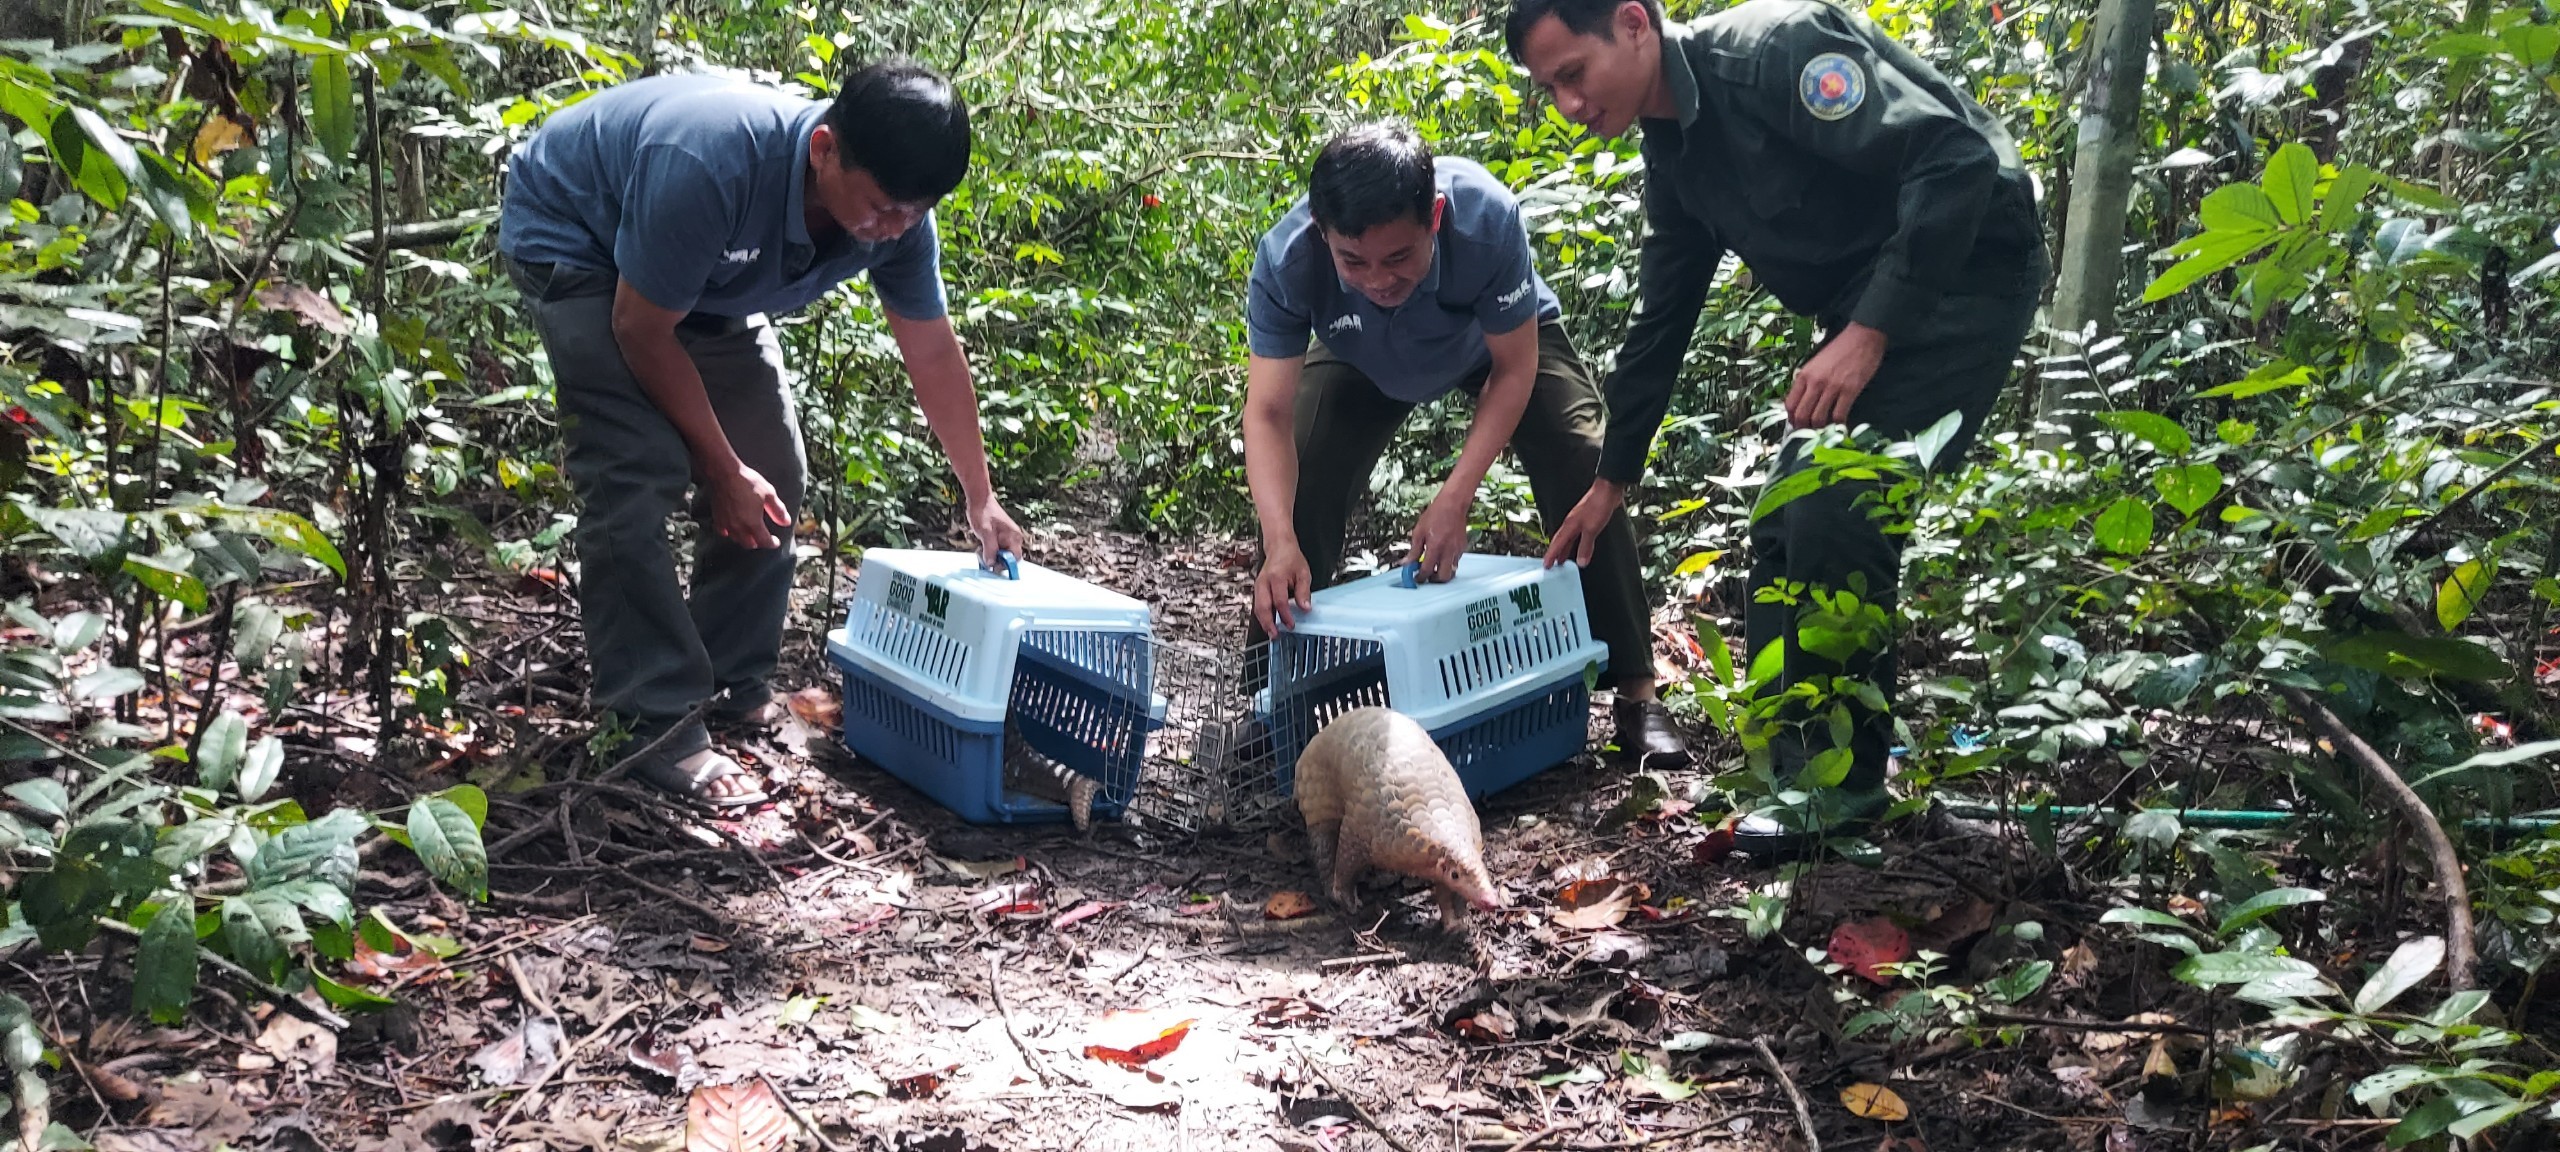 Successfully released 23 endangered wildlife to the forest